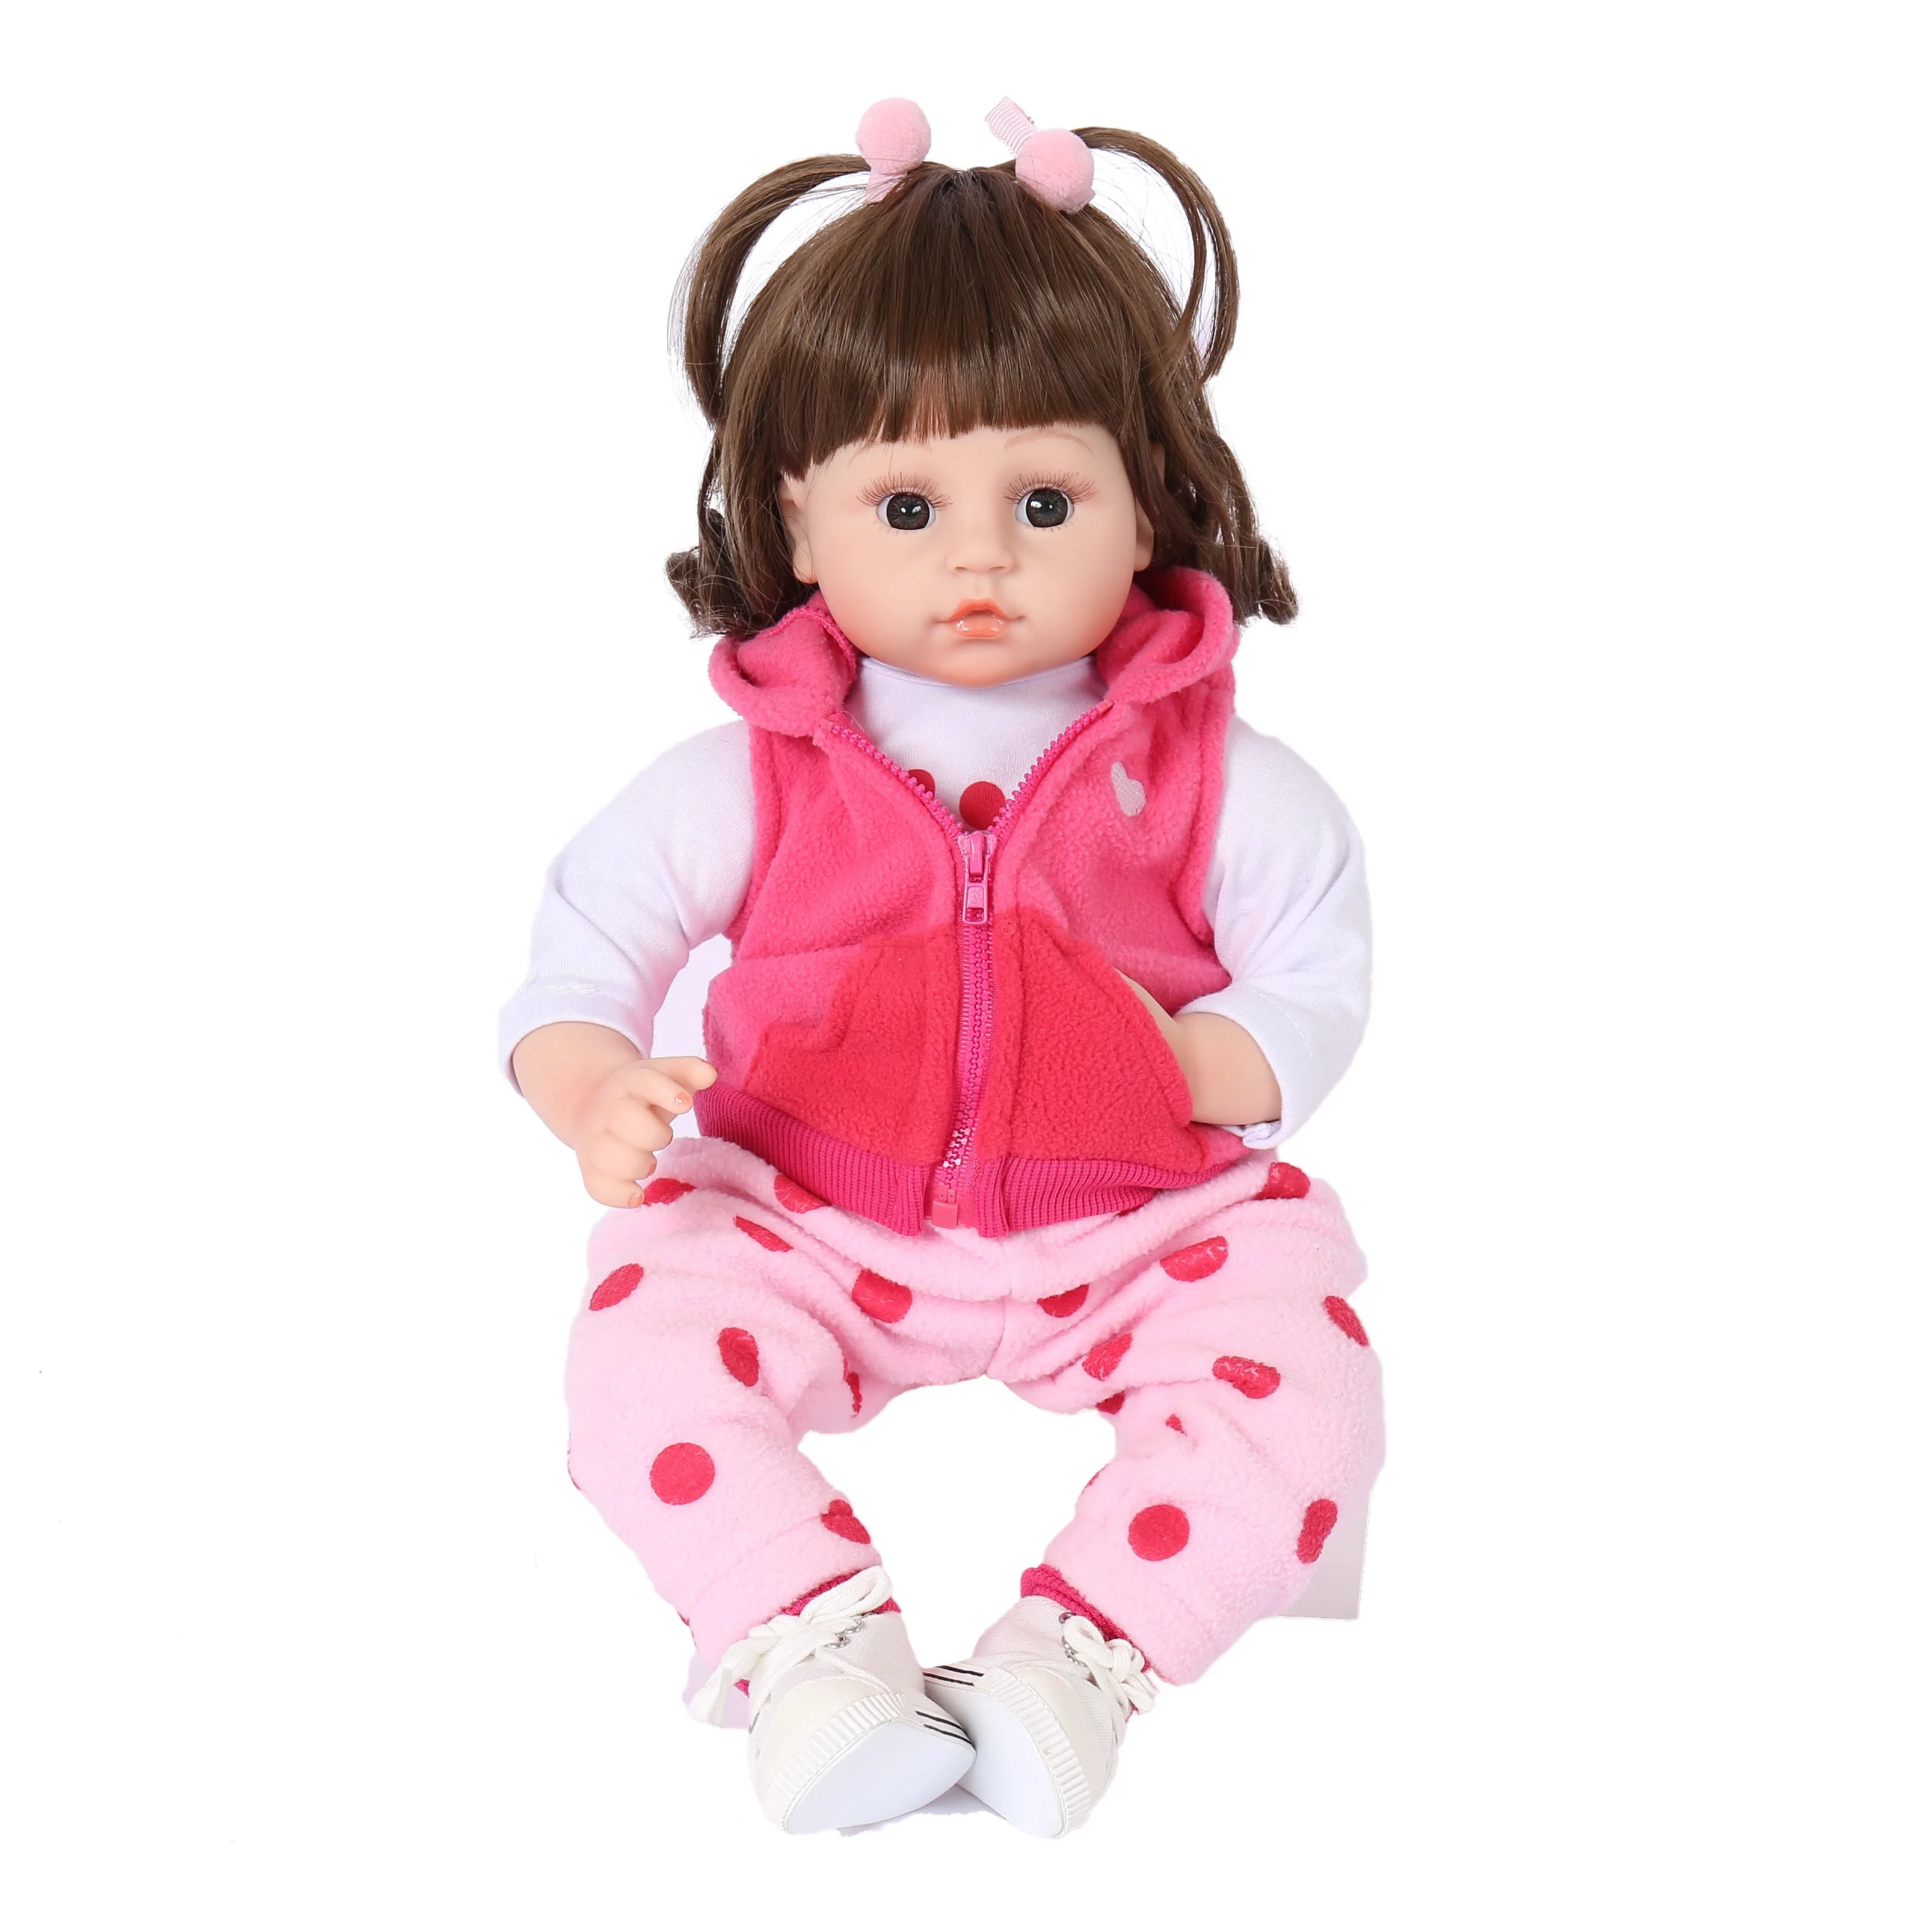 baby dolls that are cute